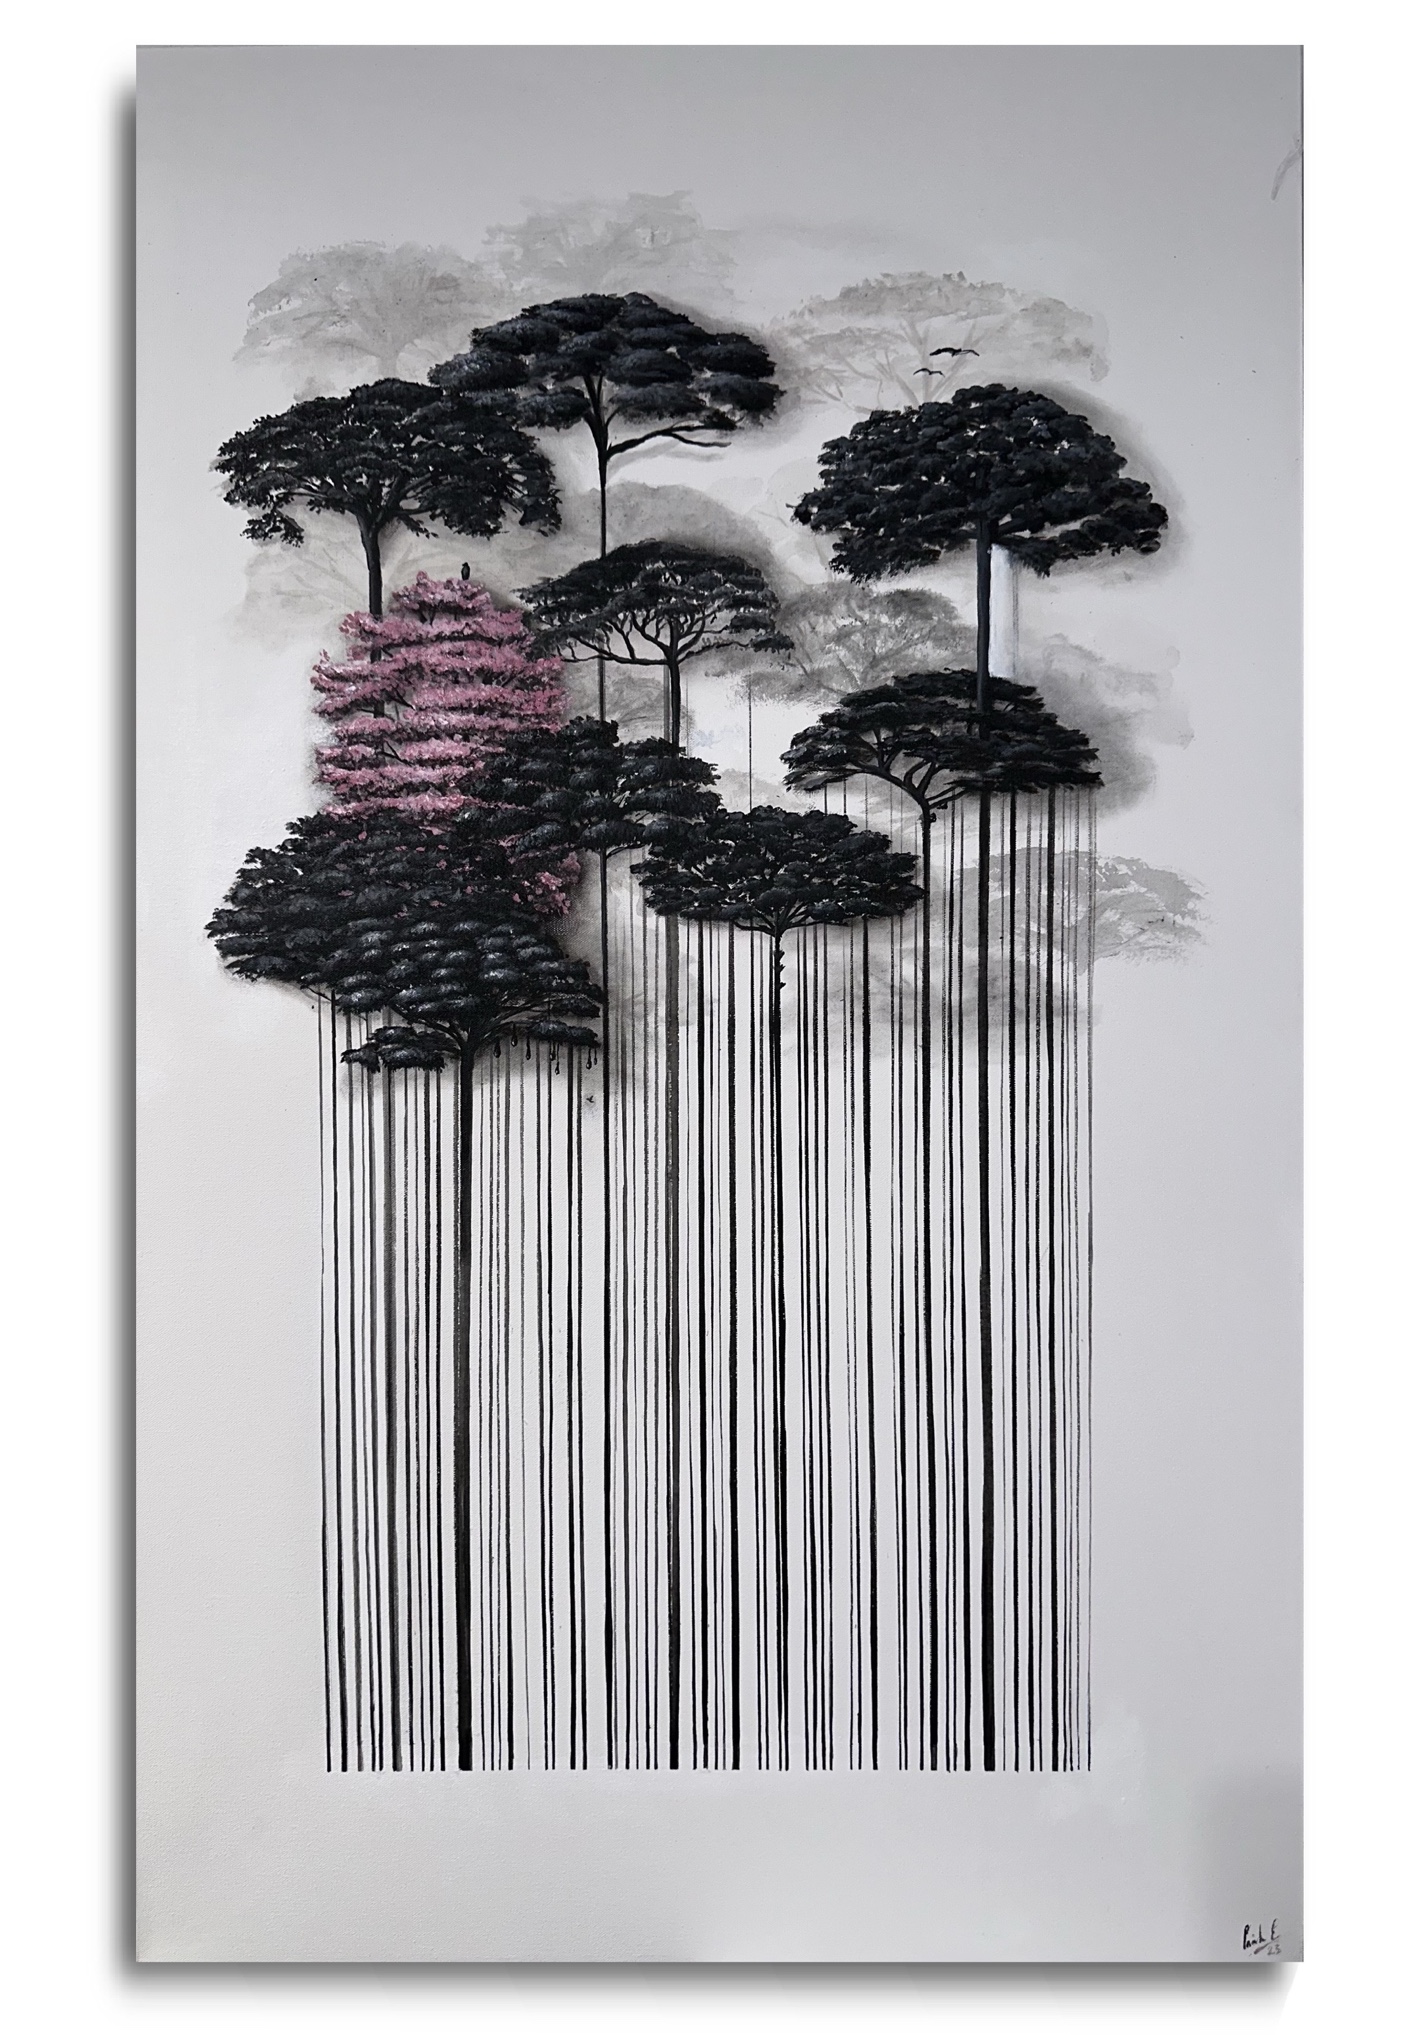 From Barcodes To Trees: My Unique Paintings That Merge Opposite Concepts (27 Pics)